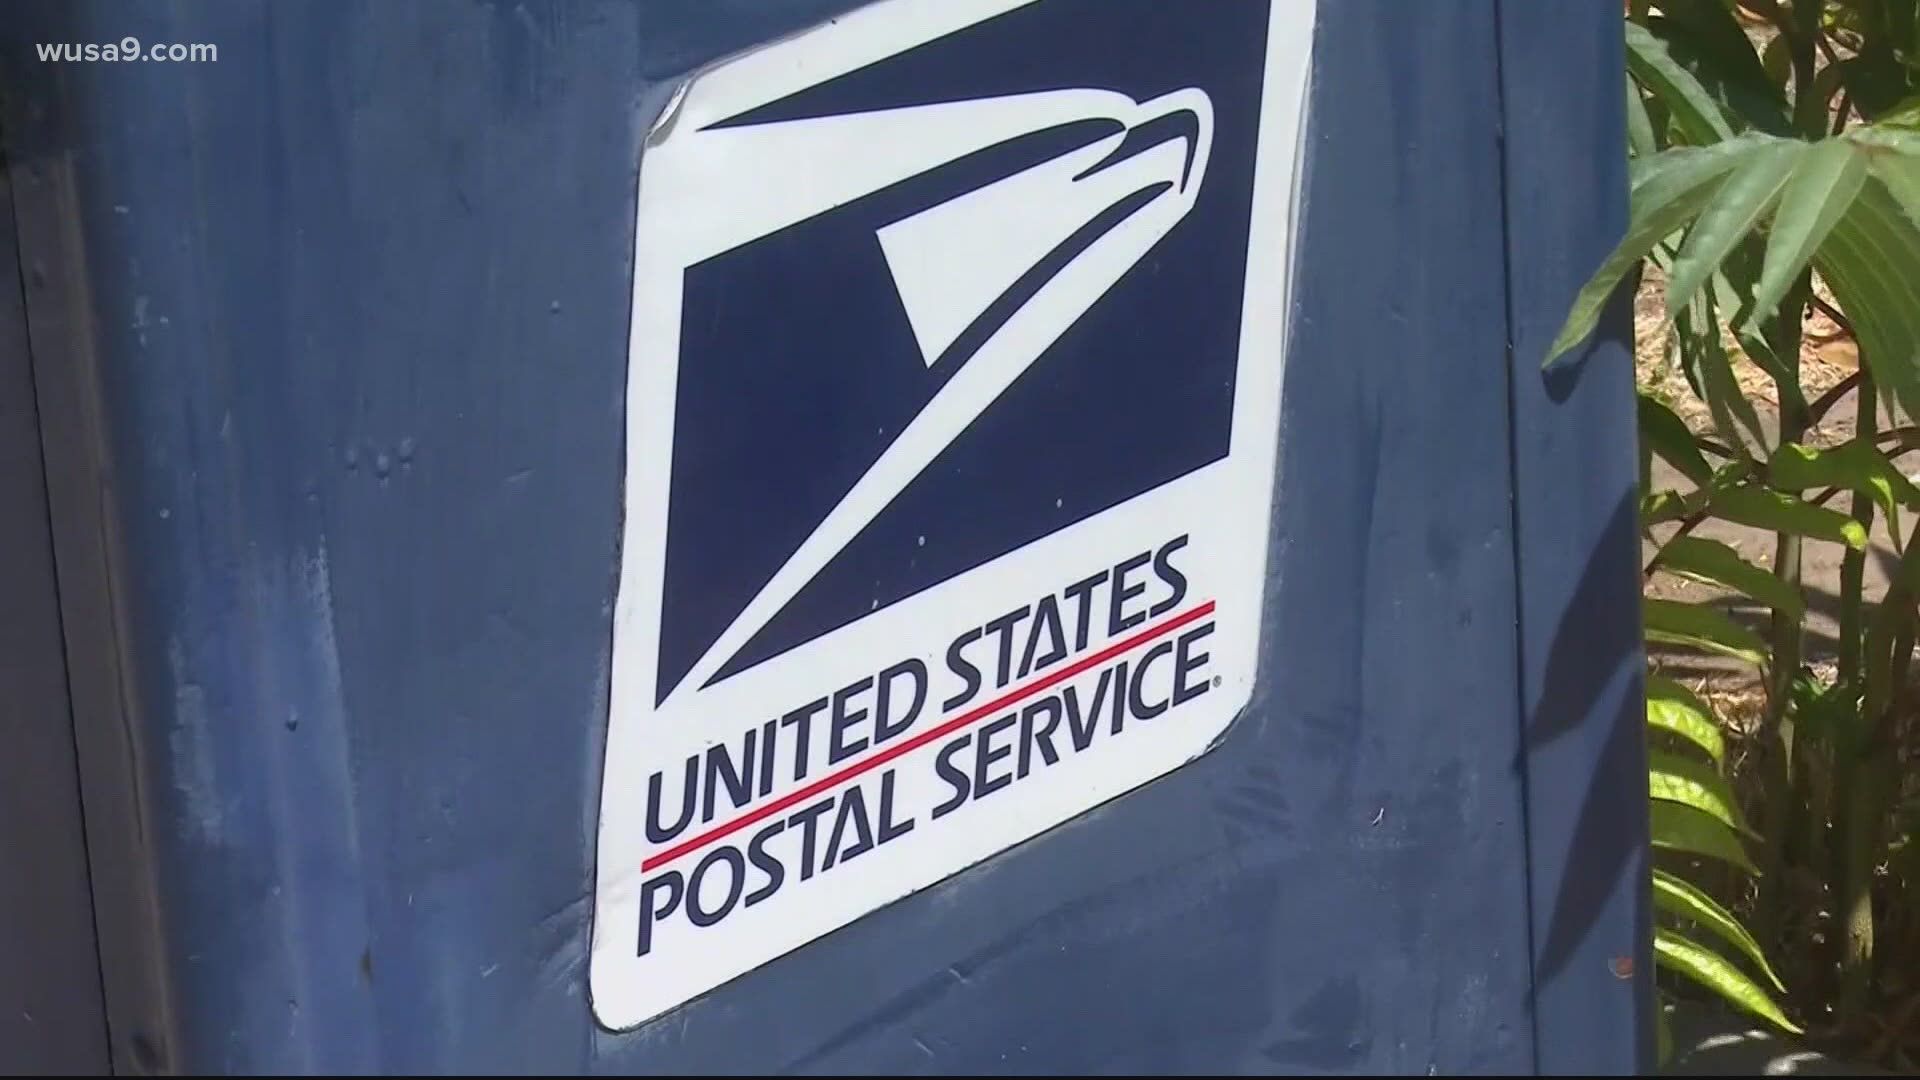 Some say they haven't received their first-class mail at least since March 22nd -- some other residents report delays of more than a month.